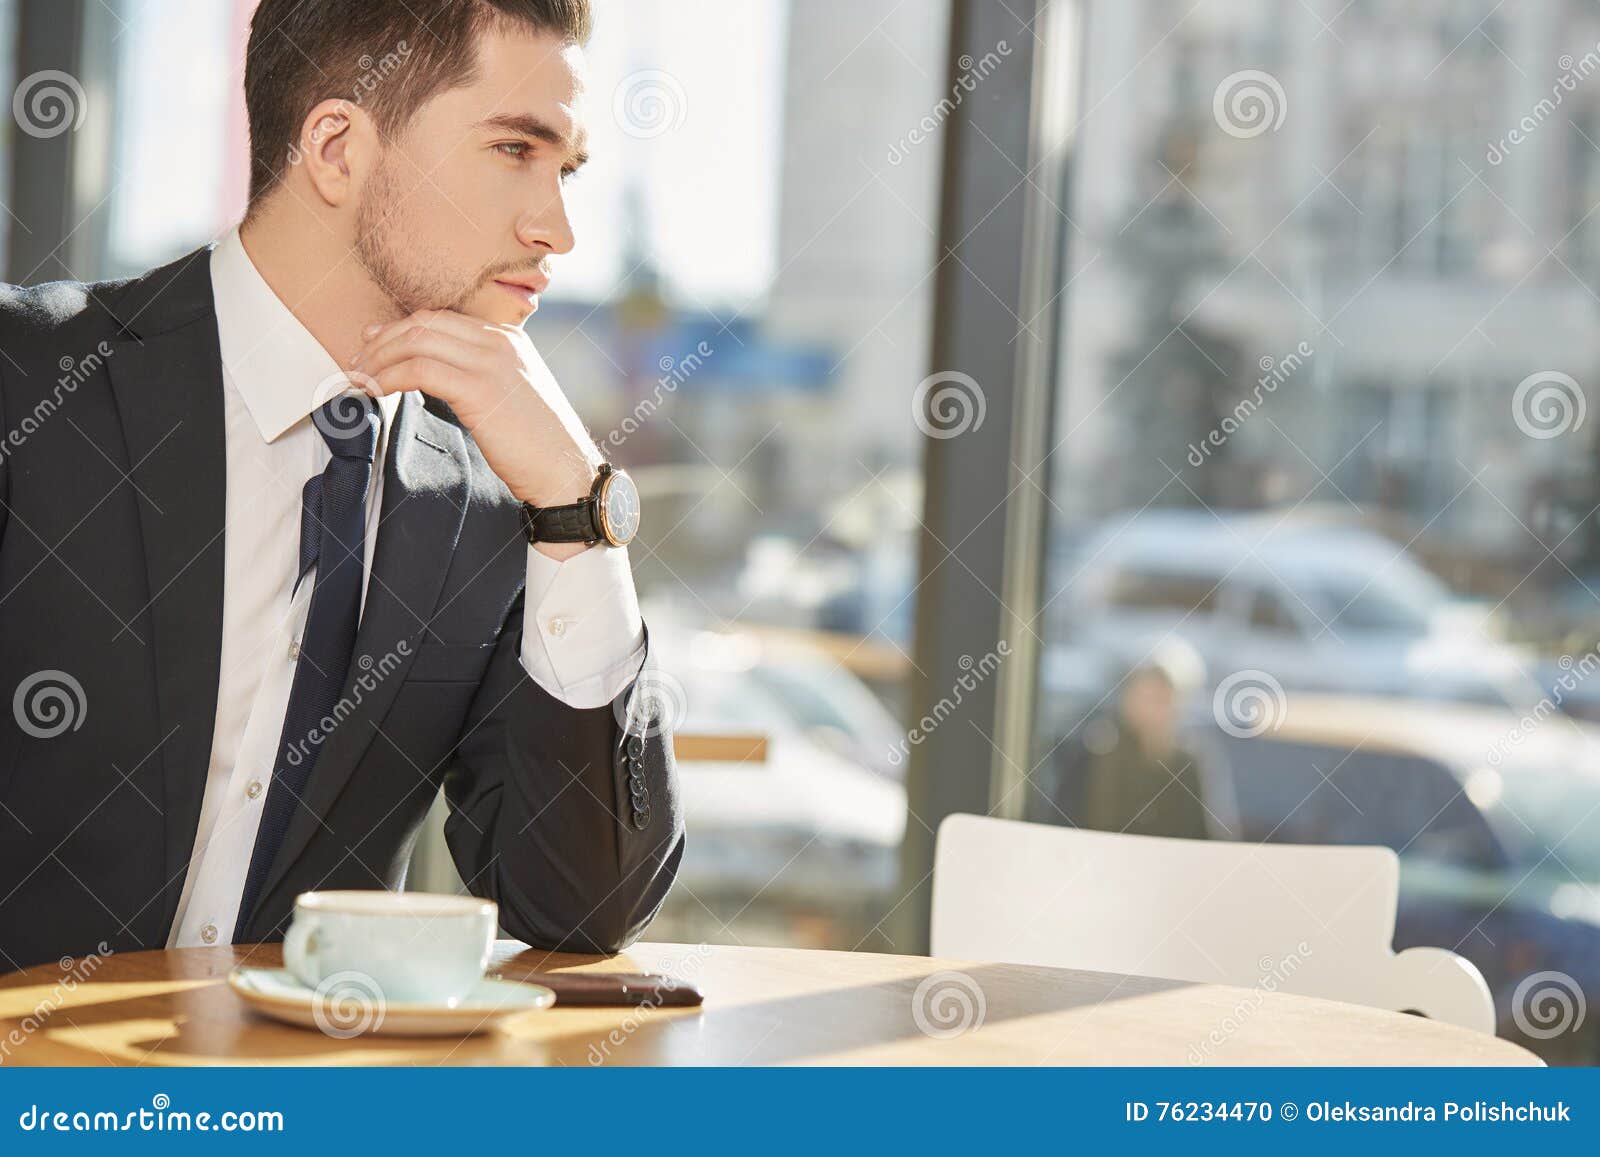 Thoughtfully In A Cafe With A Cup Of Coffee Stock Image | CartoonDealer ...
